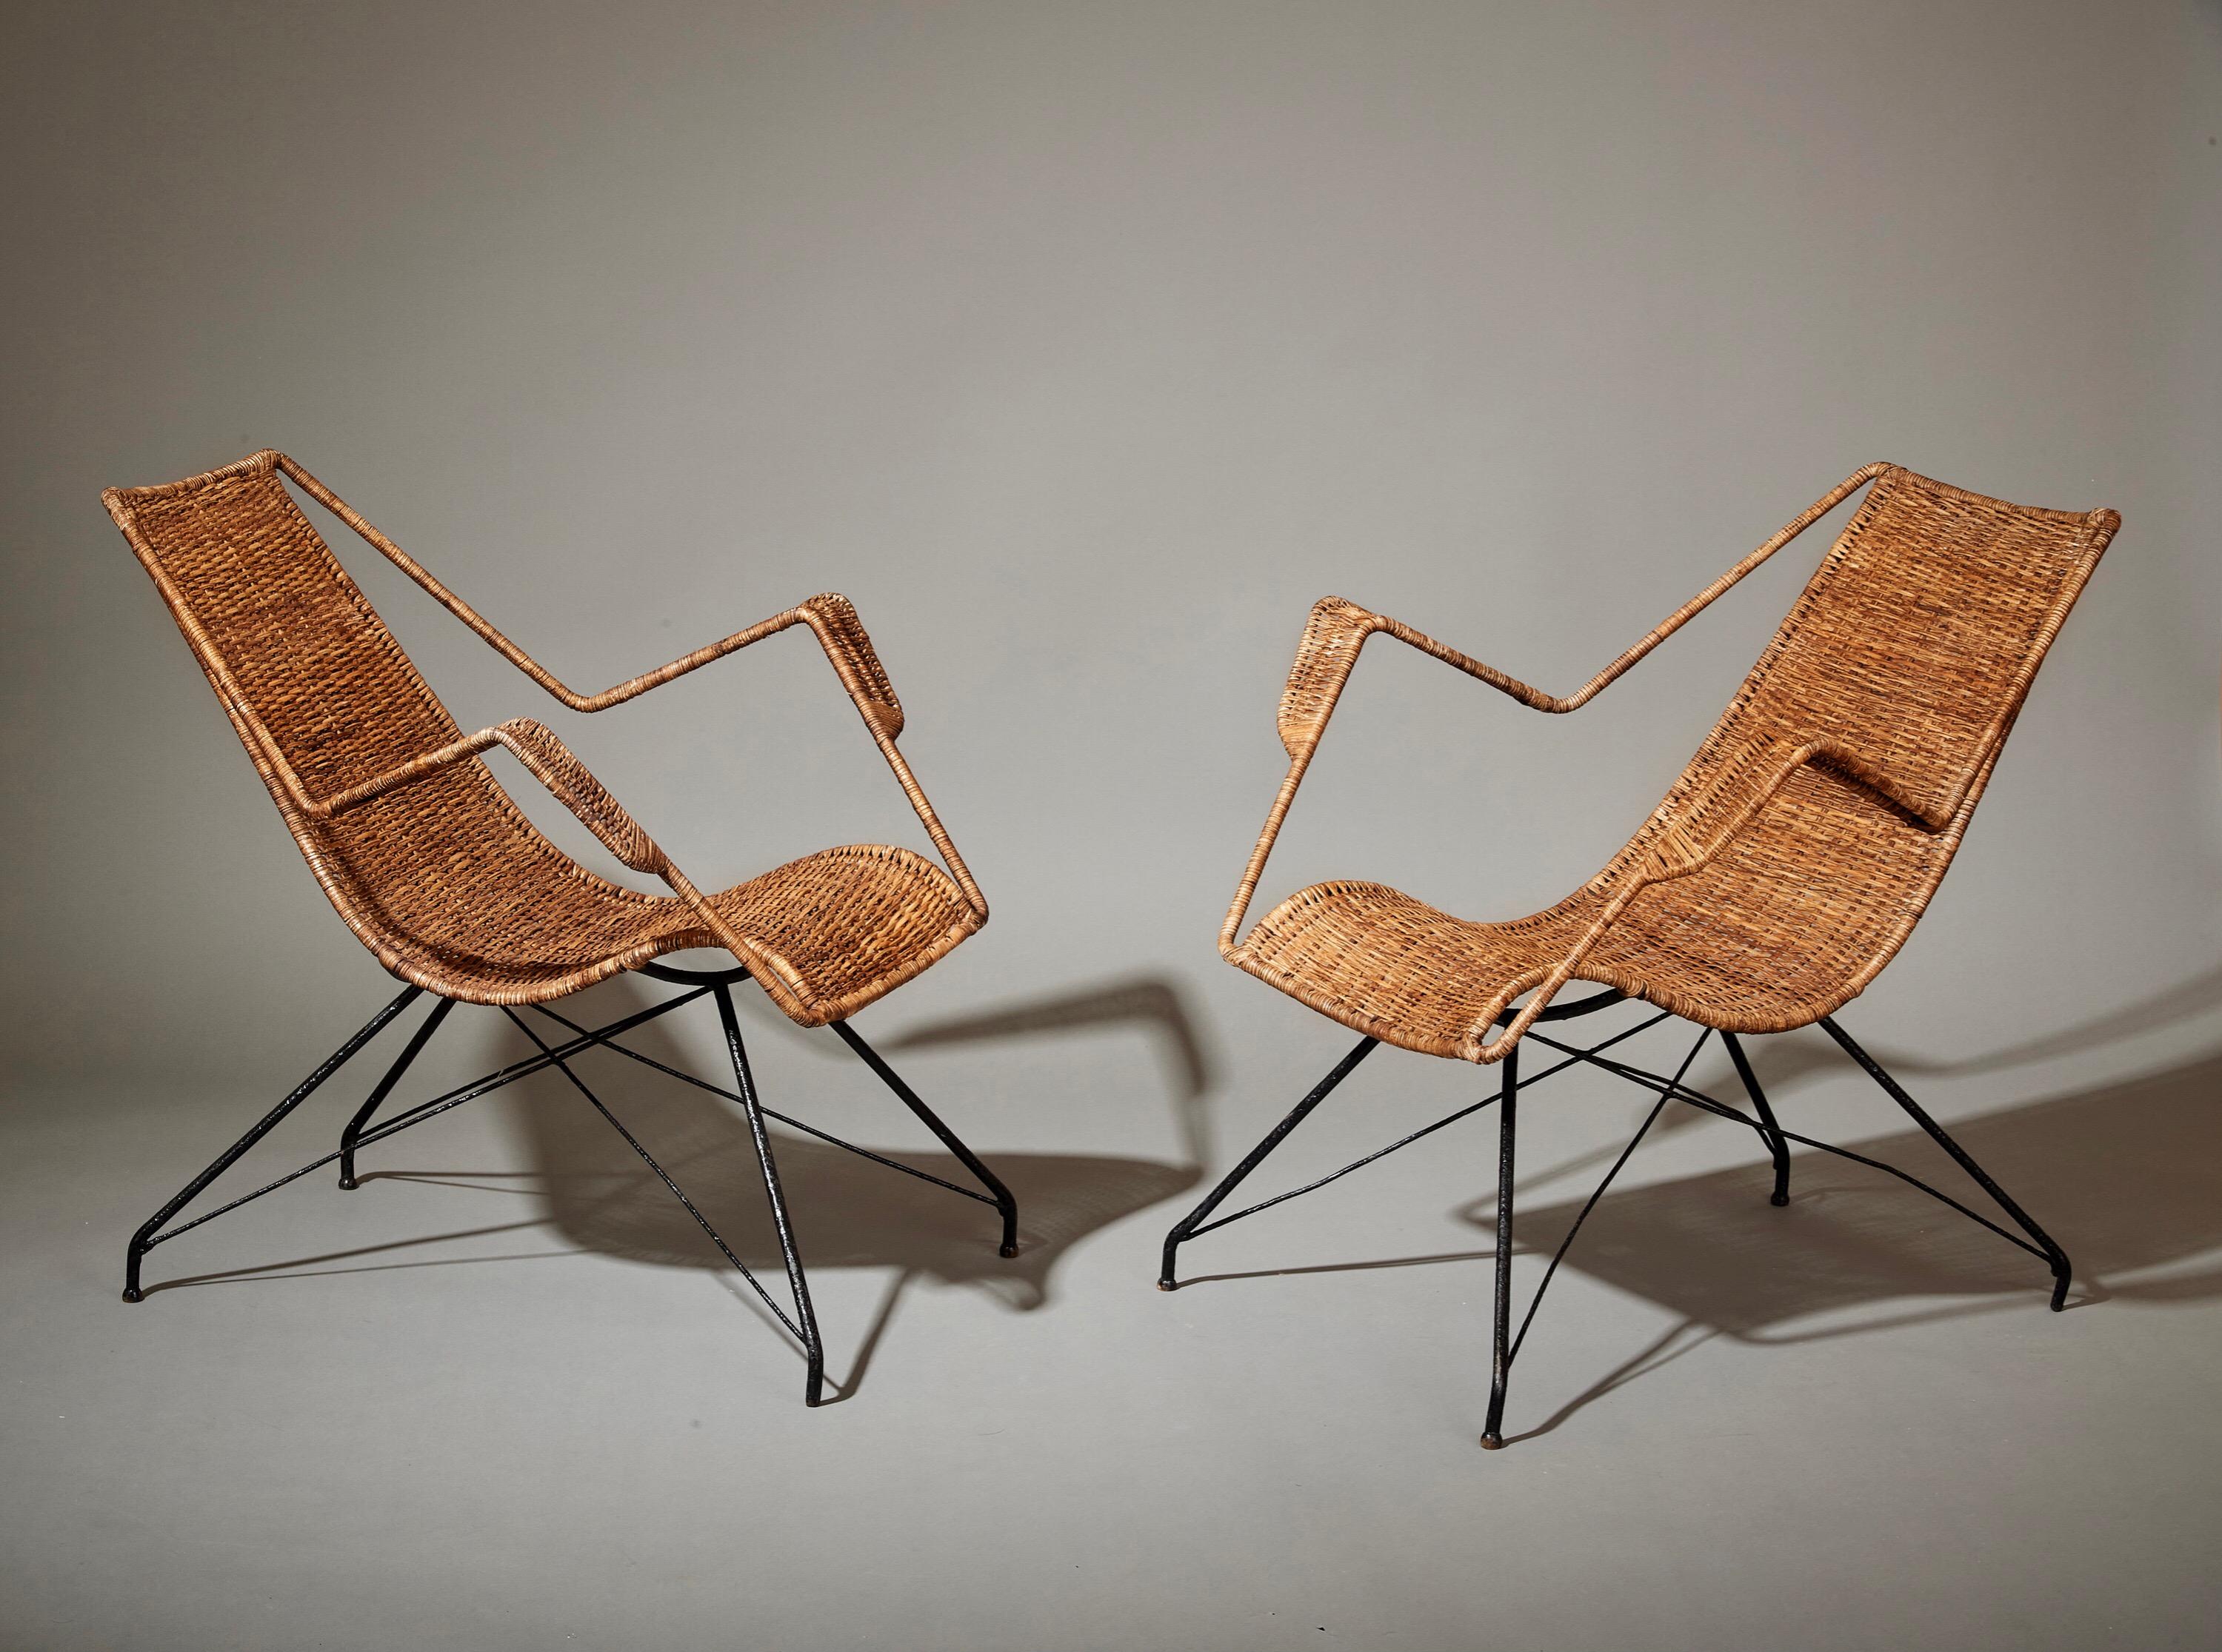 Martin Eisler (1913-1977) and Carlo Hauner (1927-1997) 

A rare and exceptional pair of lounge chairs by Carlo Hauner and Martin Eisler for their pioneering Brazilian design company, Forma. In wicker with stepped arms and enameled steel Eiffel legs.